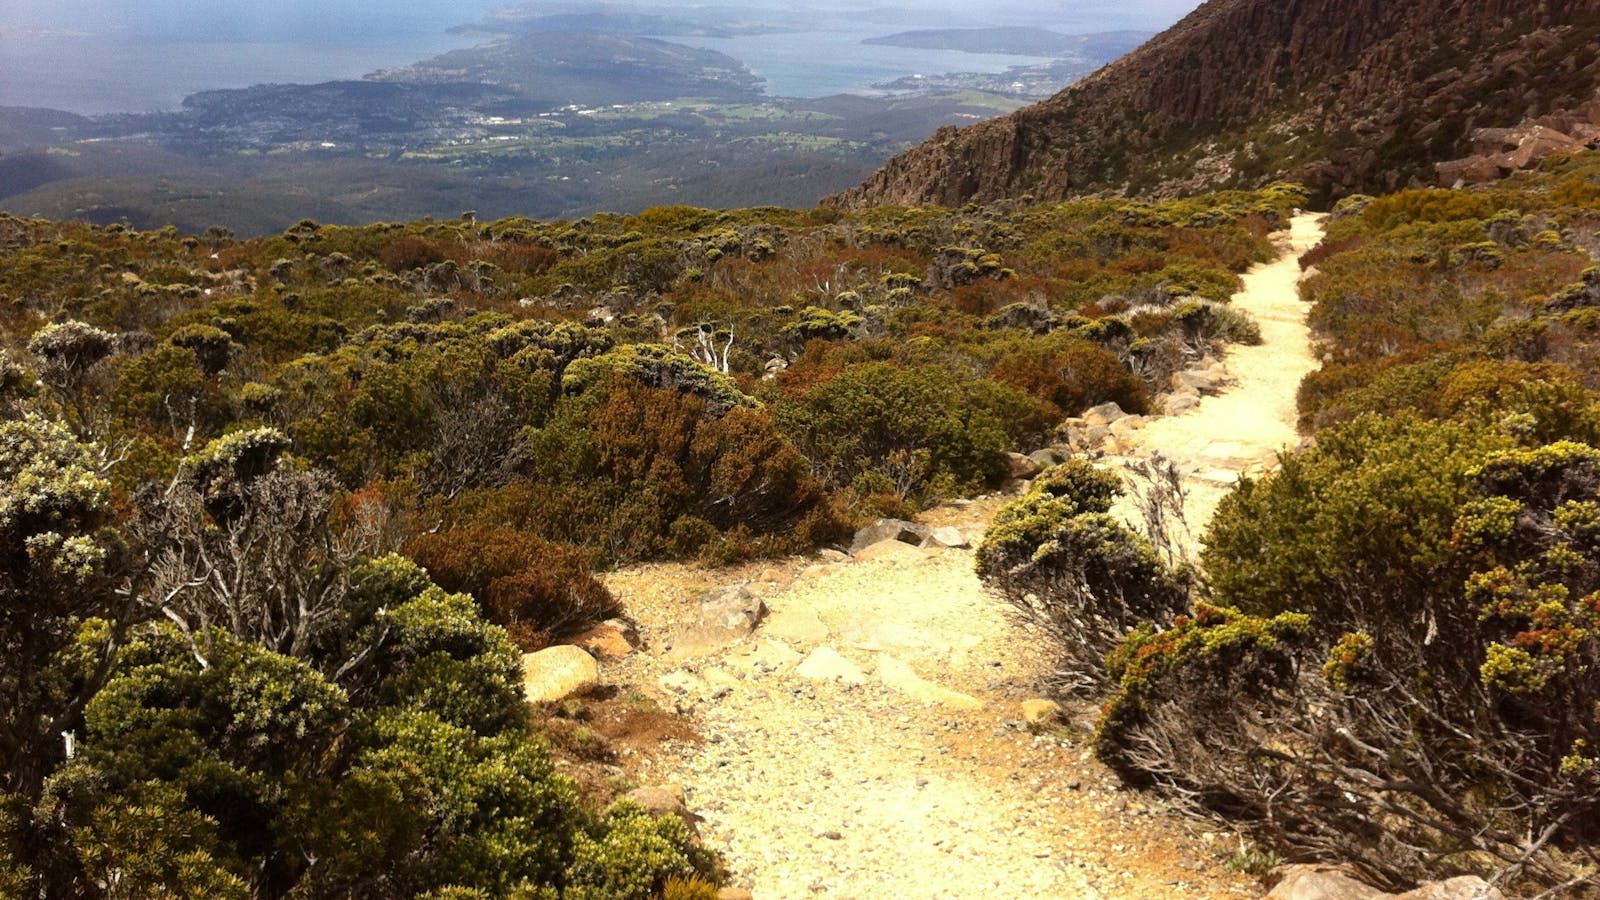 Let Adventure Trails Tasmania guide you to some of Tasmania's secret spots and less-travelled trails